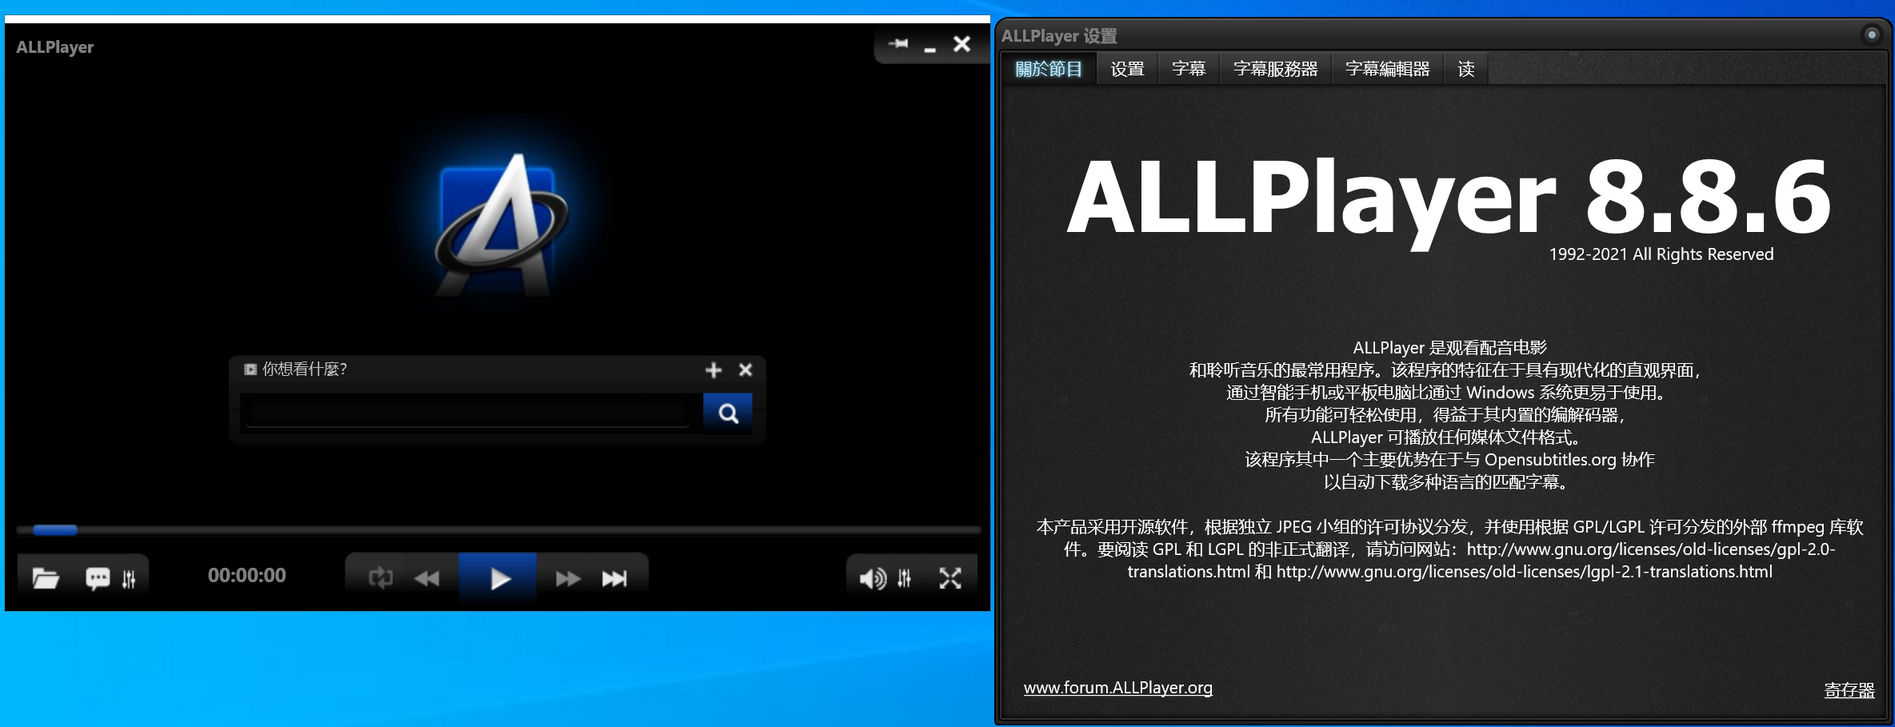 download the new version for iphoneALLPlayer 8.9.6